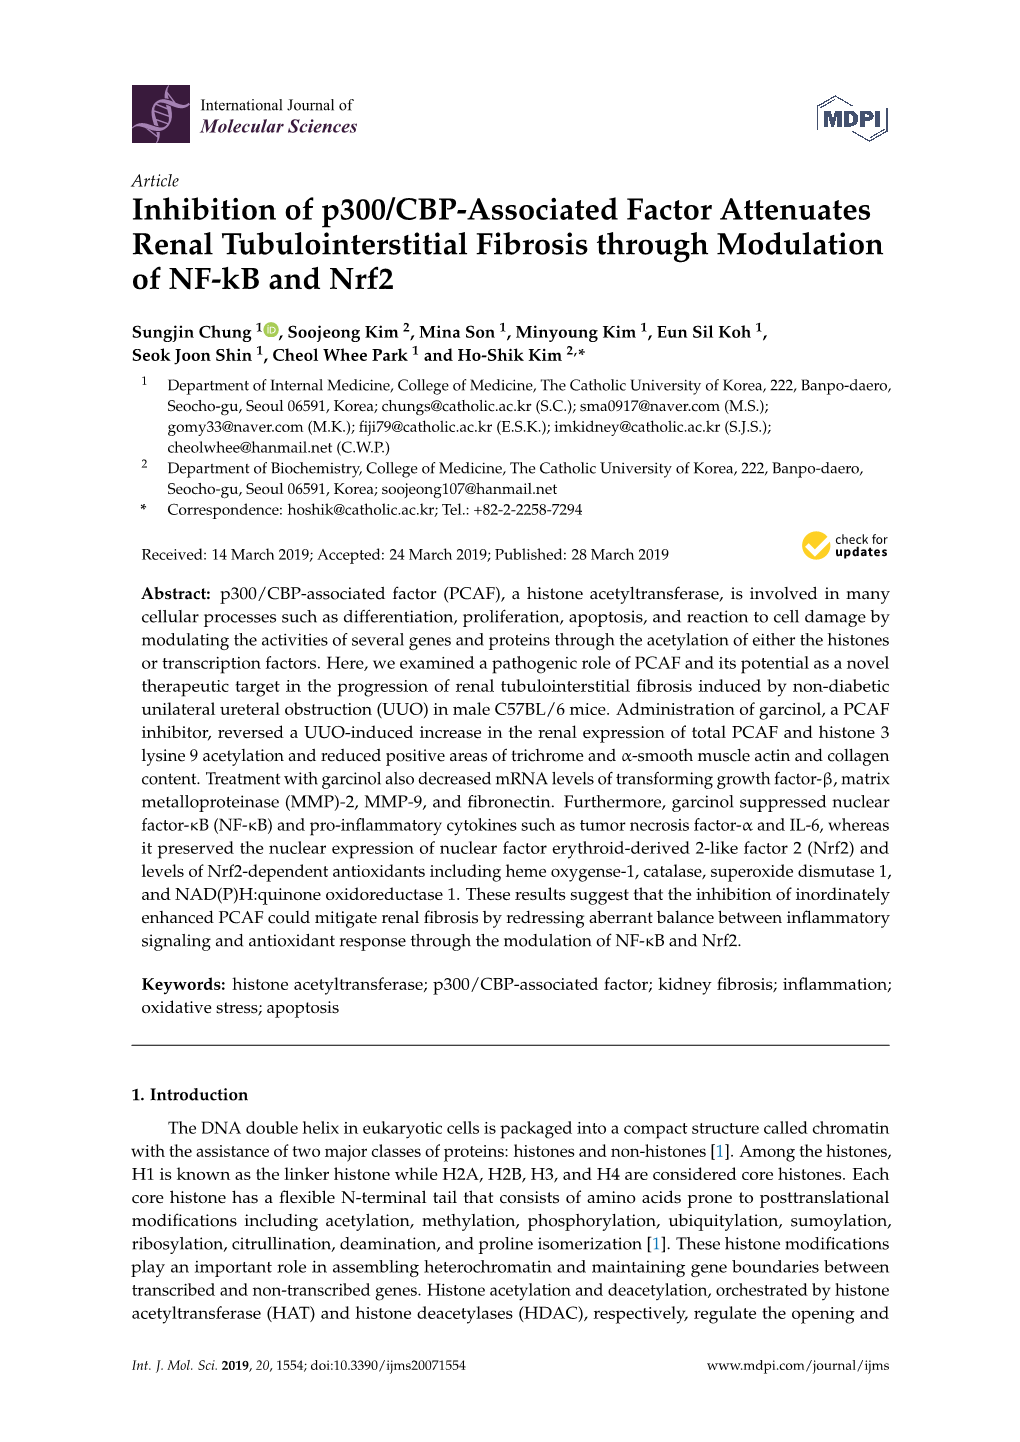 Inhibition of P300/CBP-Associated Factor Attenuates Renal Tubulointerstitial Fibrosis Through Modulation of NF-Kb and Nrf2